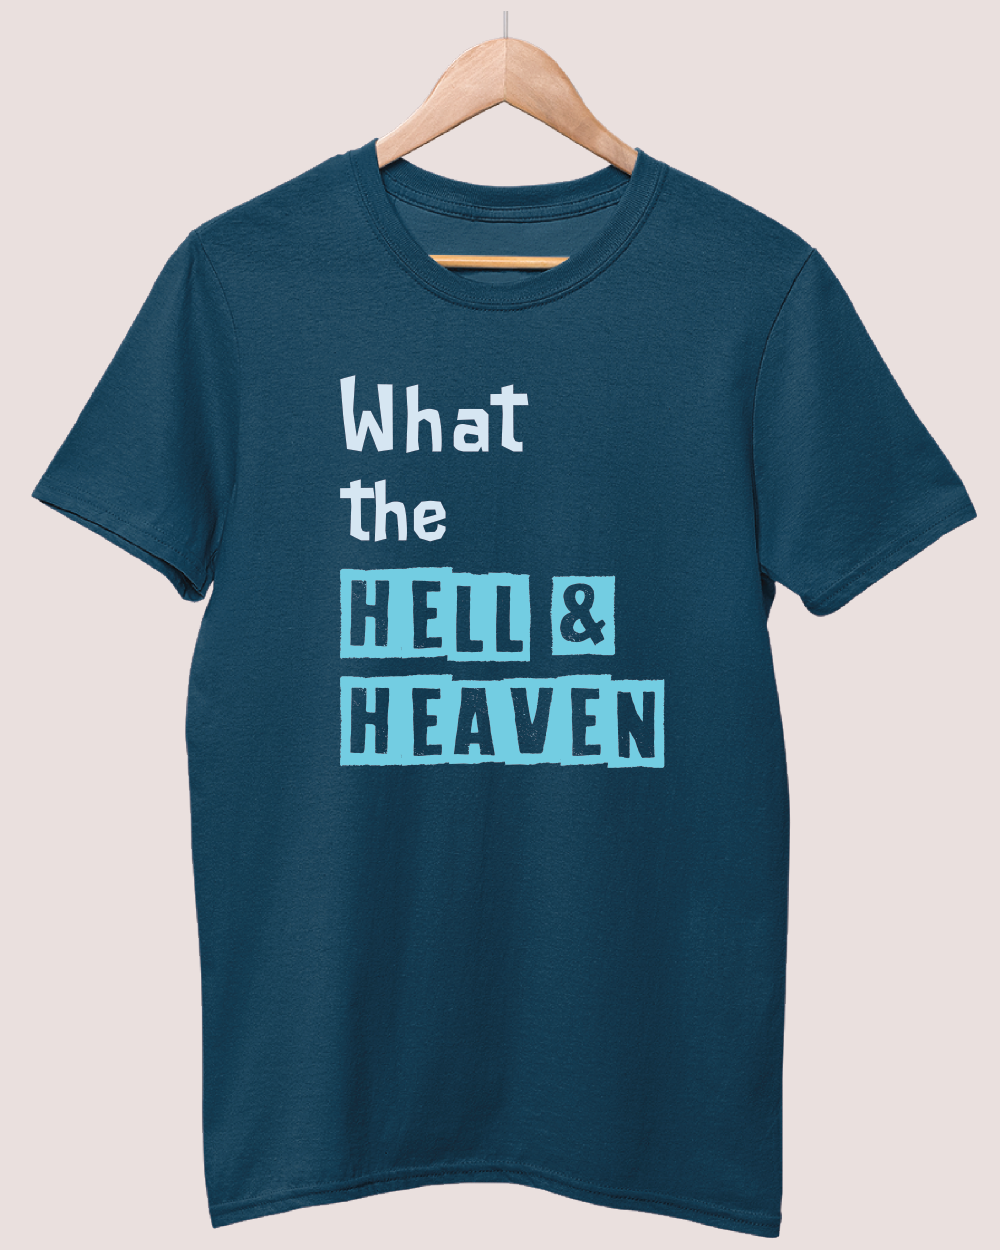 What the hell and heaven T-shirt